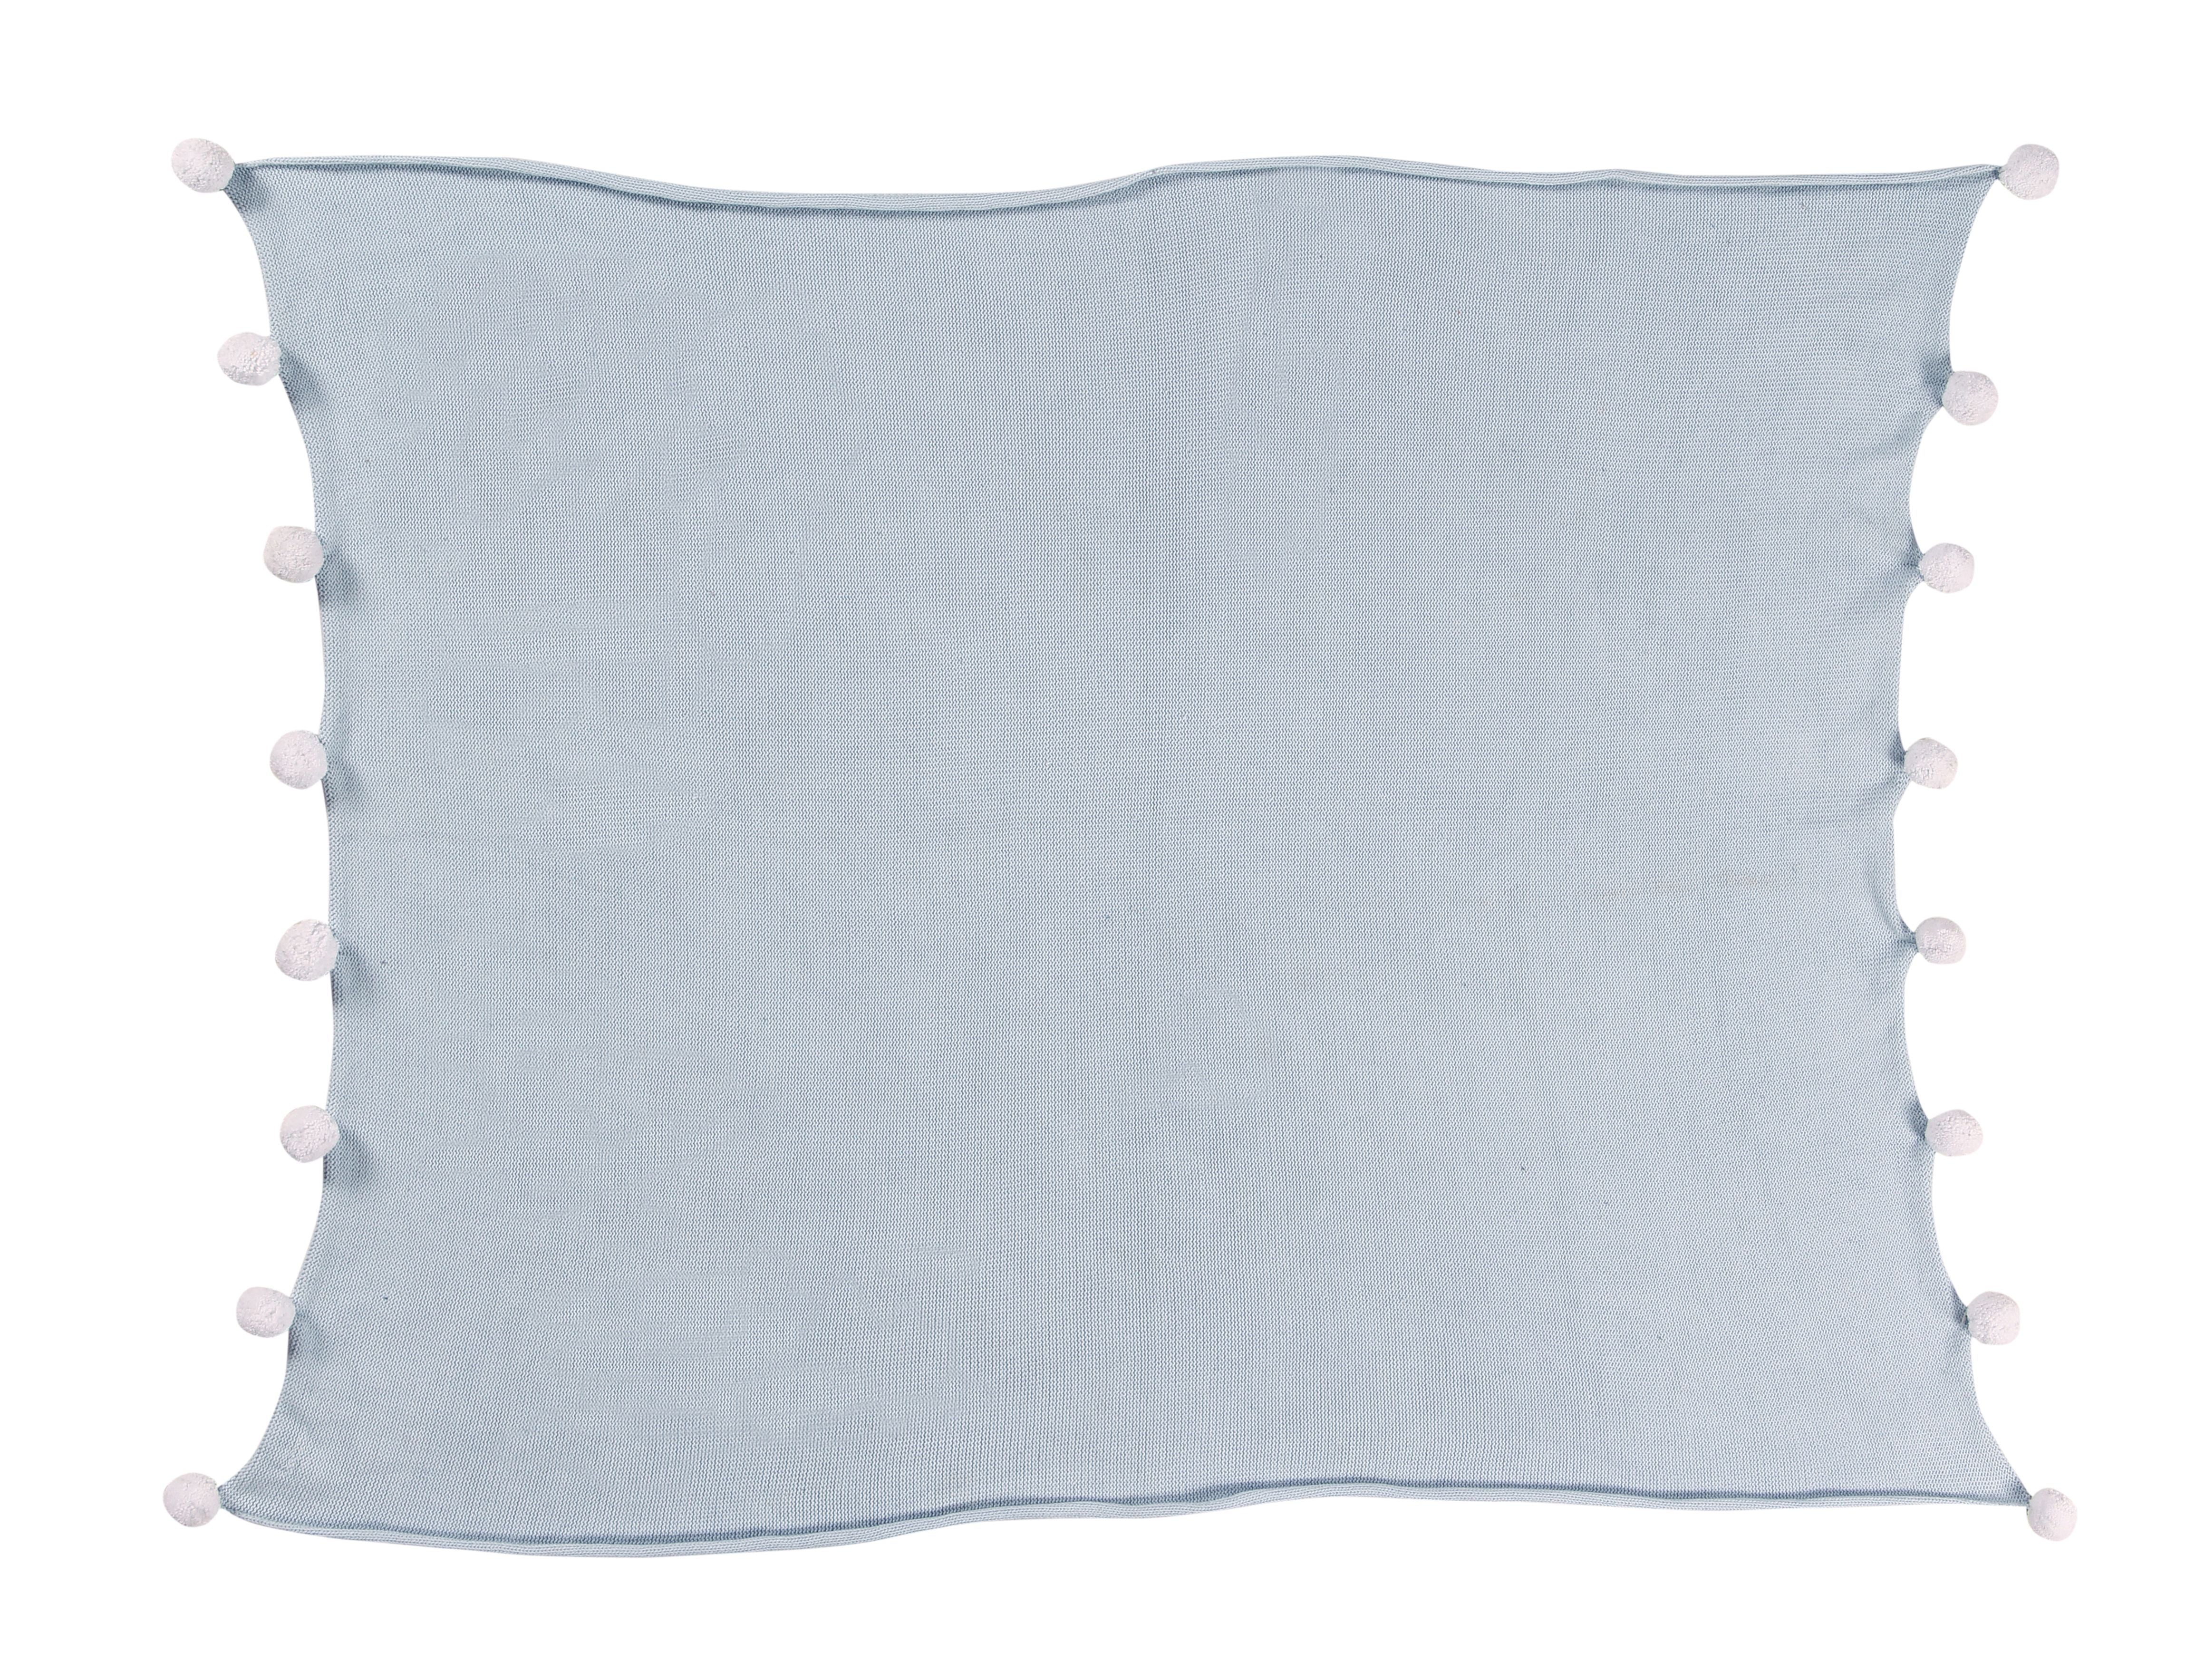 Bubbly Baby Blanket in Soft Blue design by Lorena Canals